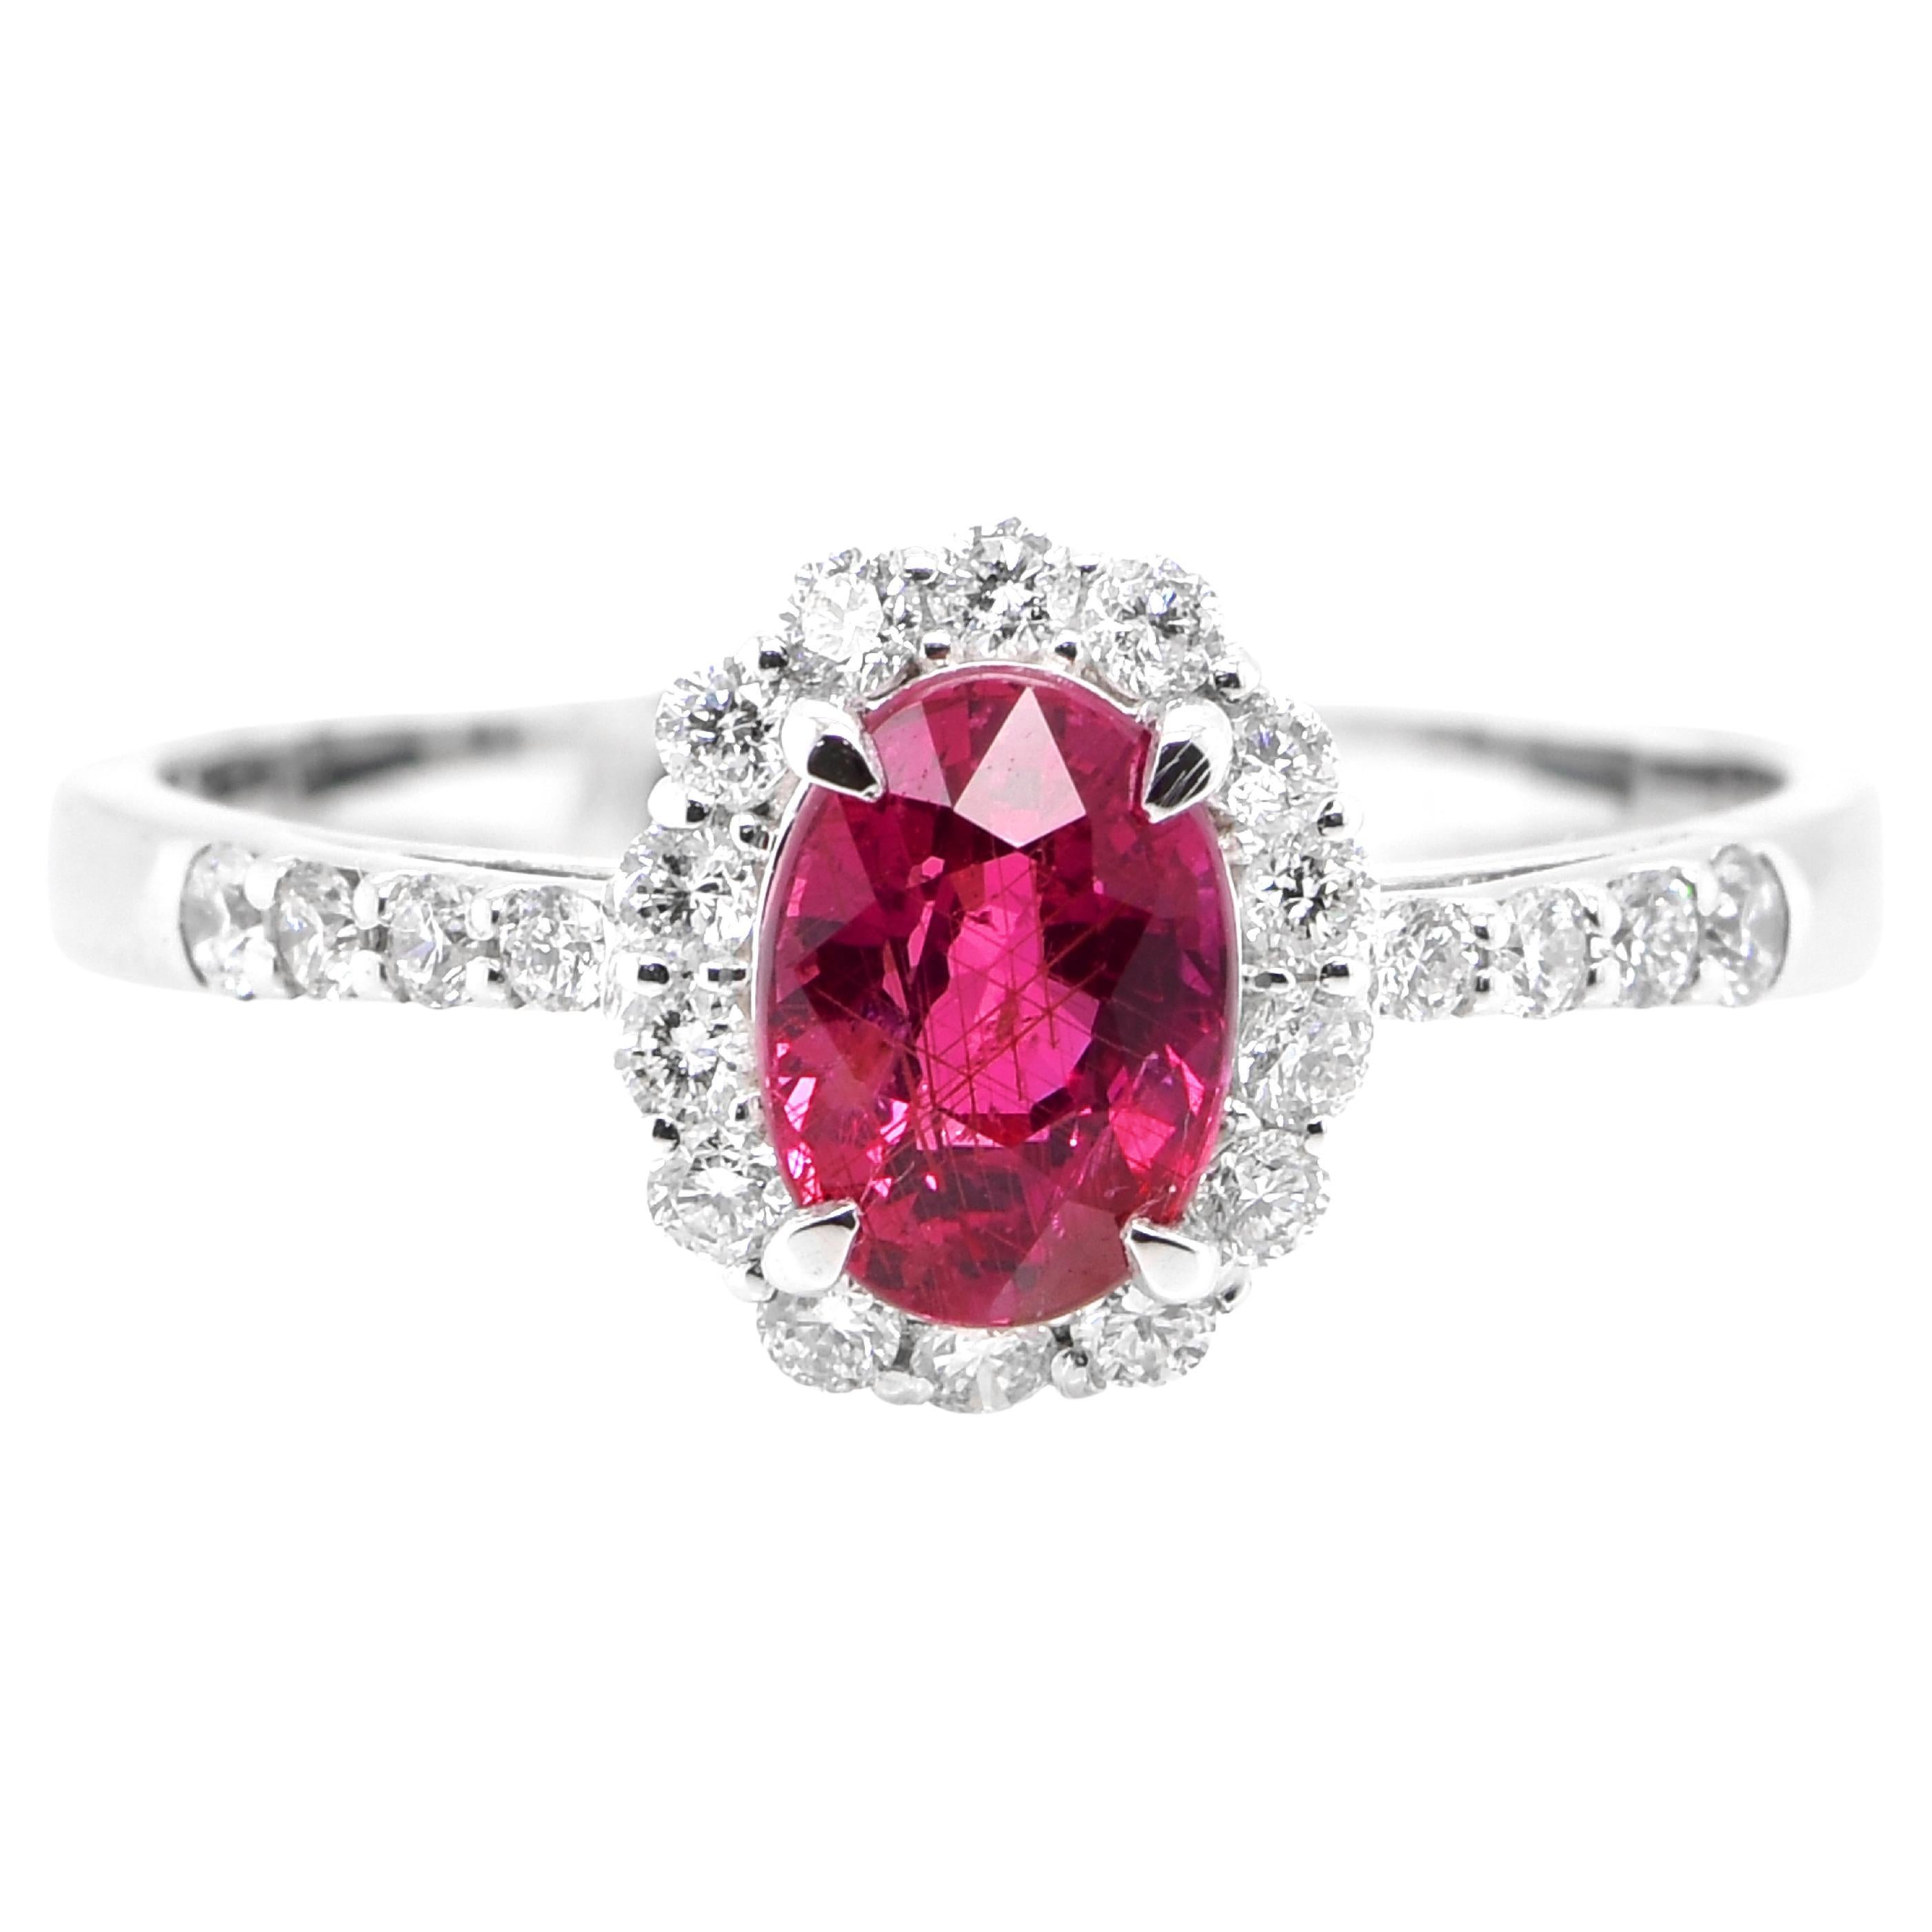 GIA Certified 1.07 Carat Untreated Ruby & Diamond Cocktail Ring Made in Platinum For Sale